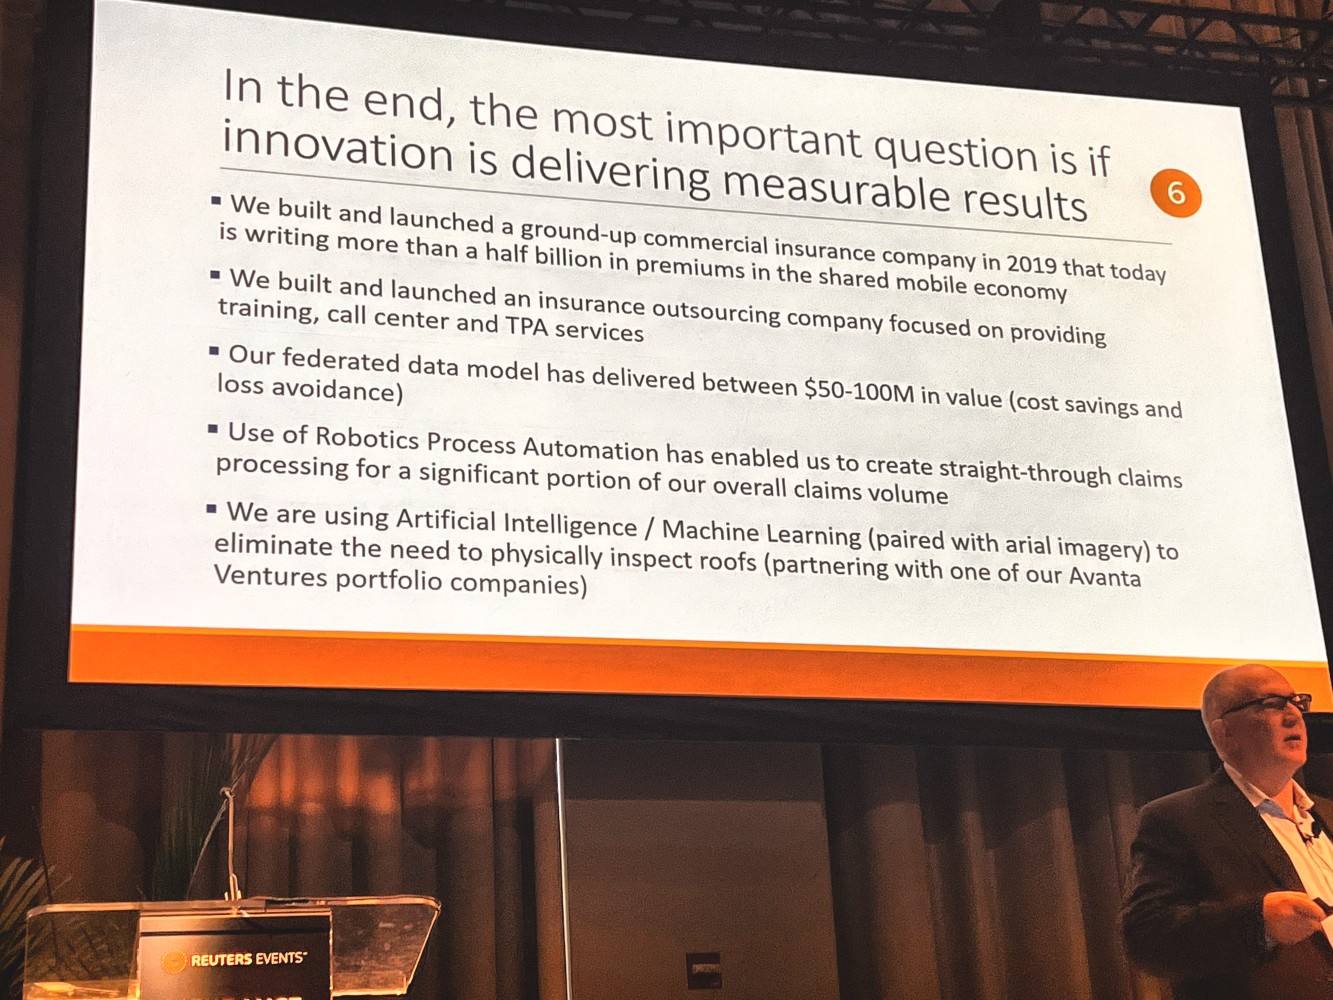 Powerpoint slide from an insurance conference about innovation